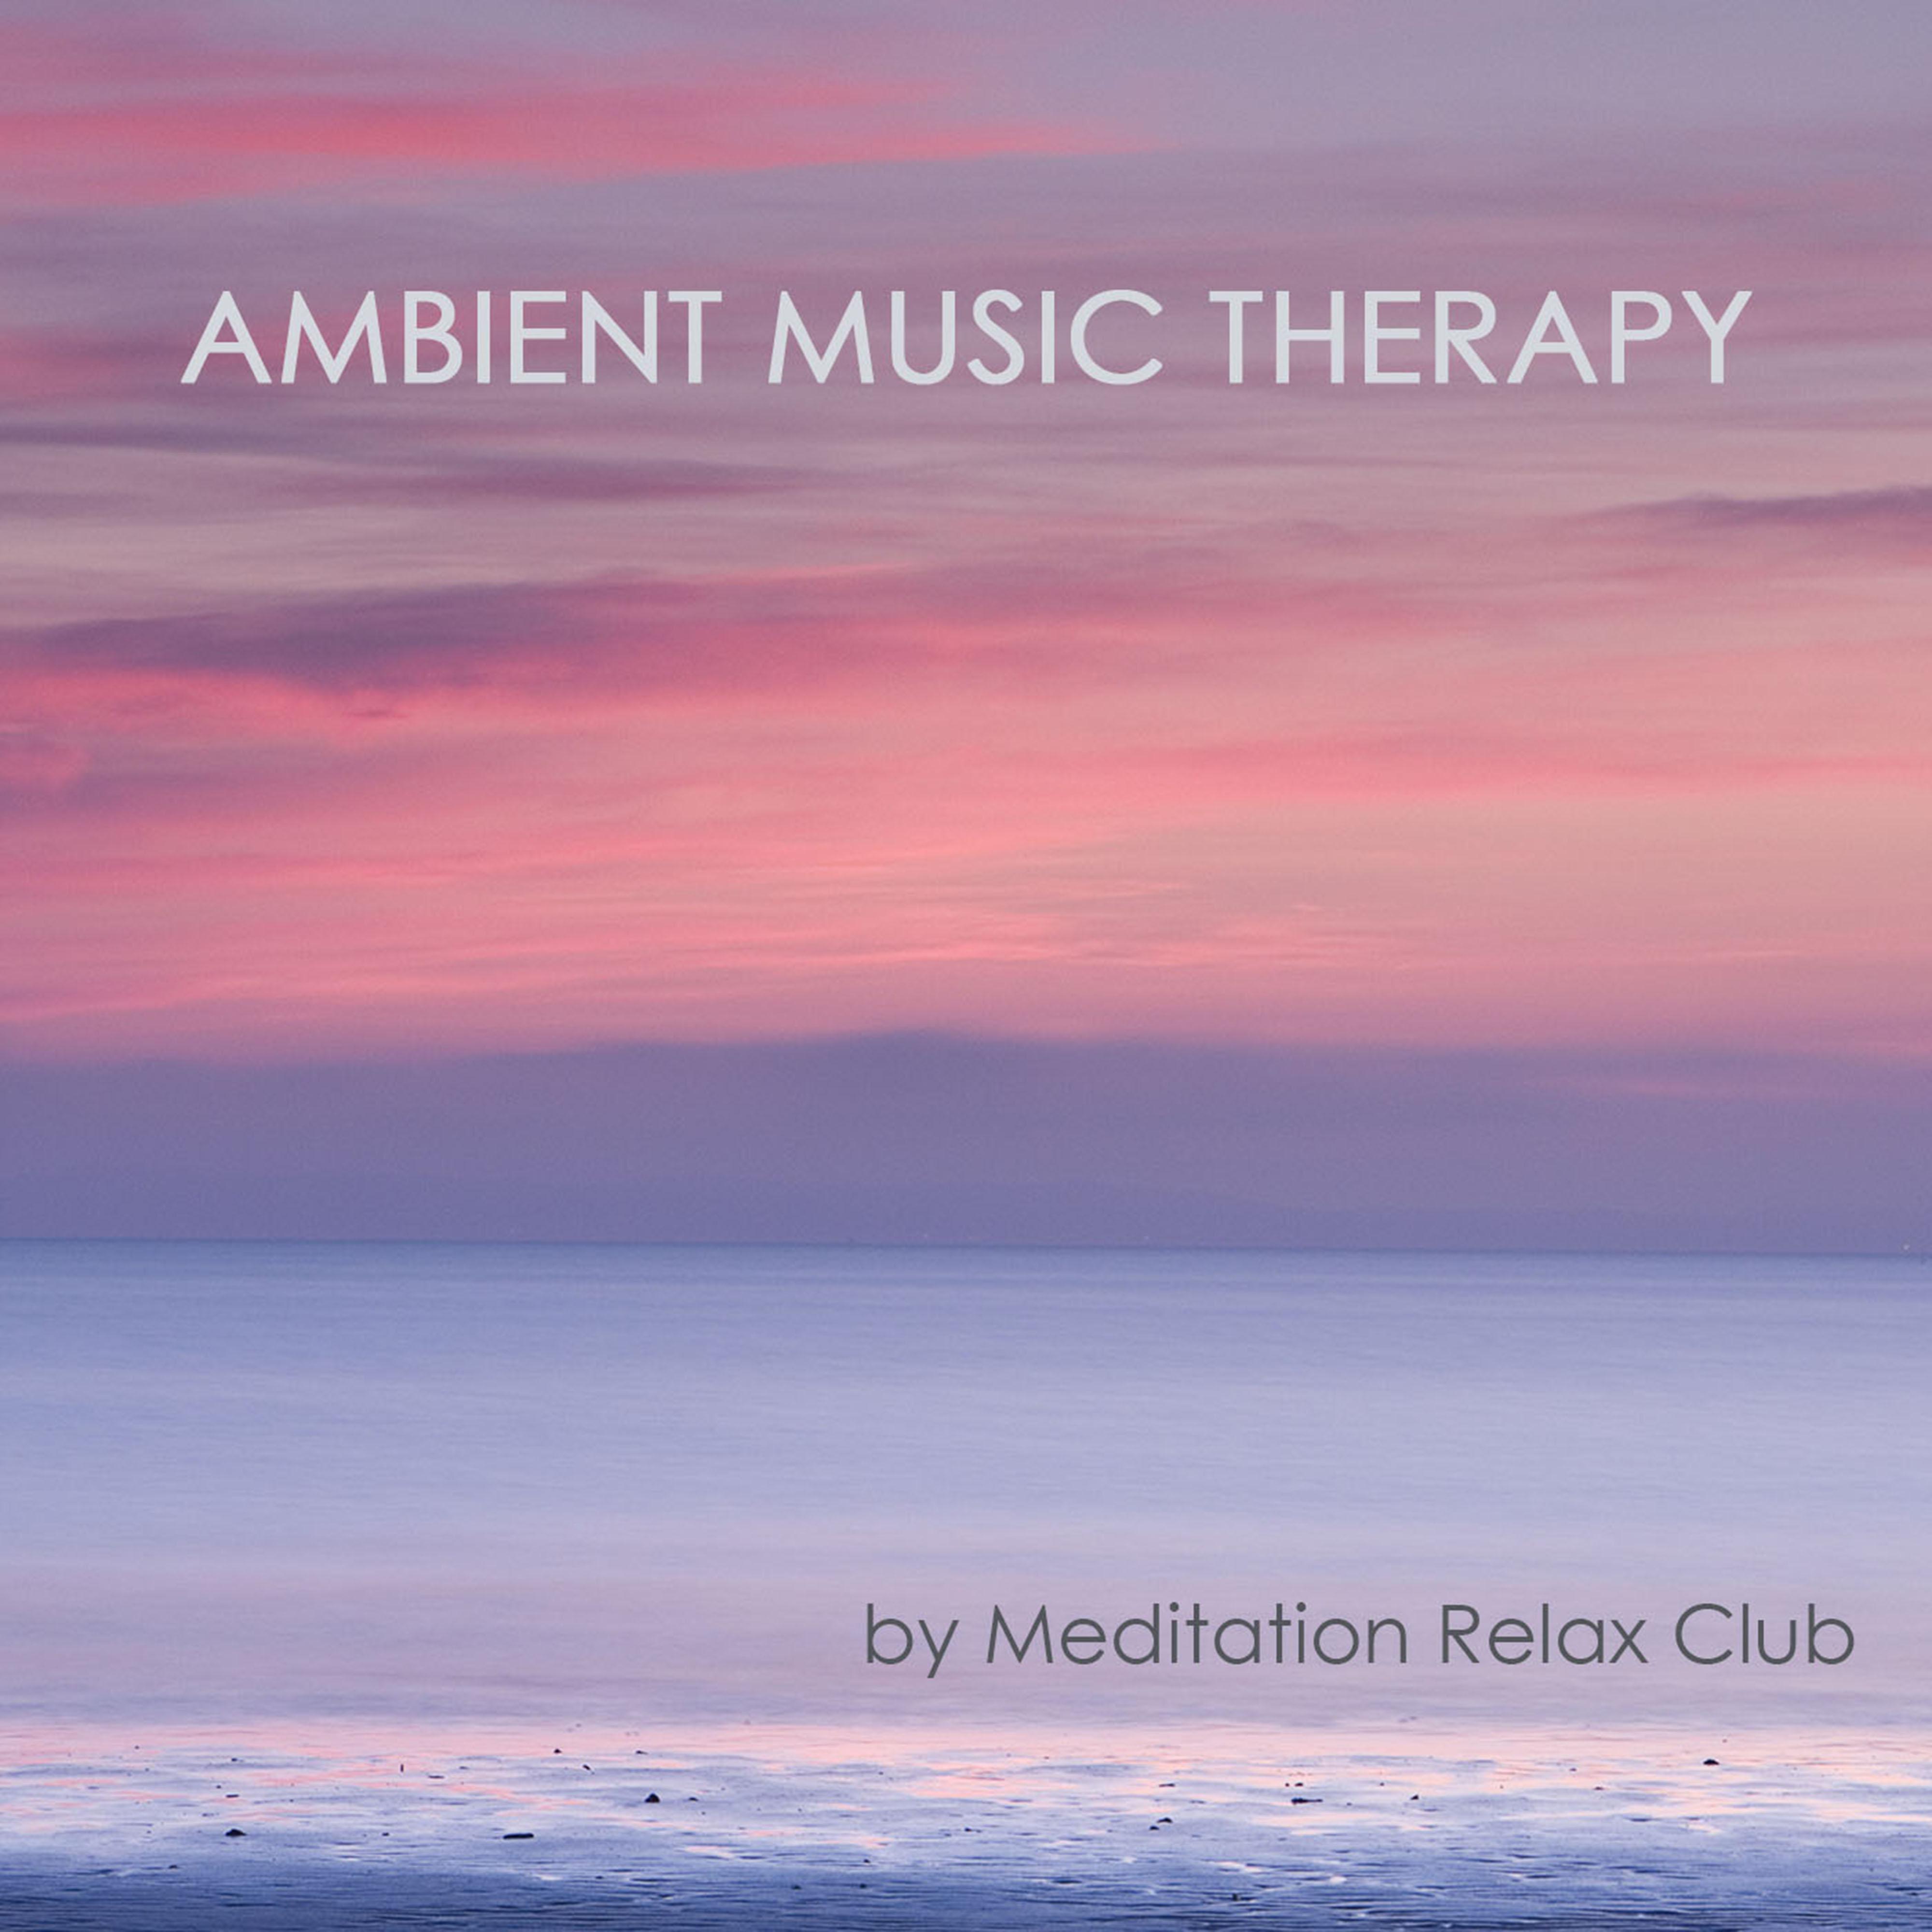 Ambient Music Therapy: Healing Music Sound Therapy for Relax and Chakra Balancing, Holistic Health and Well Being